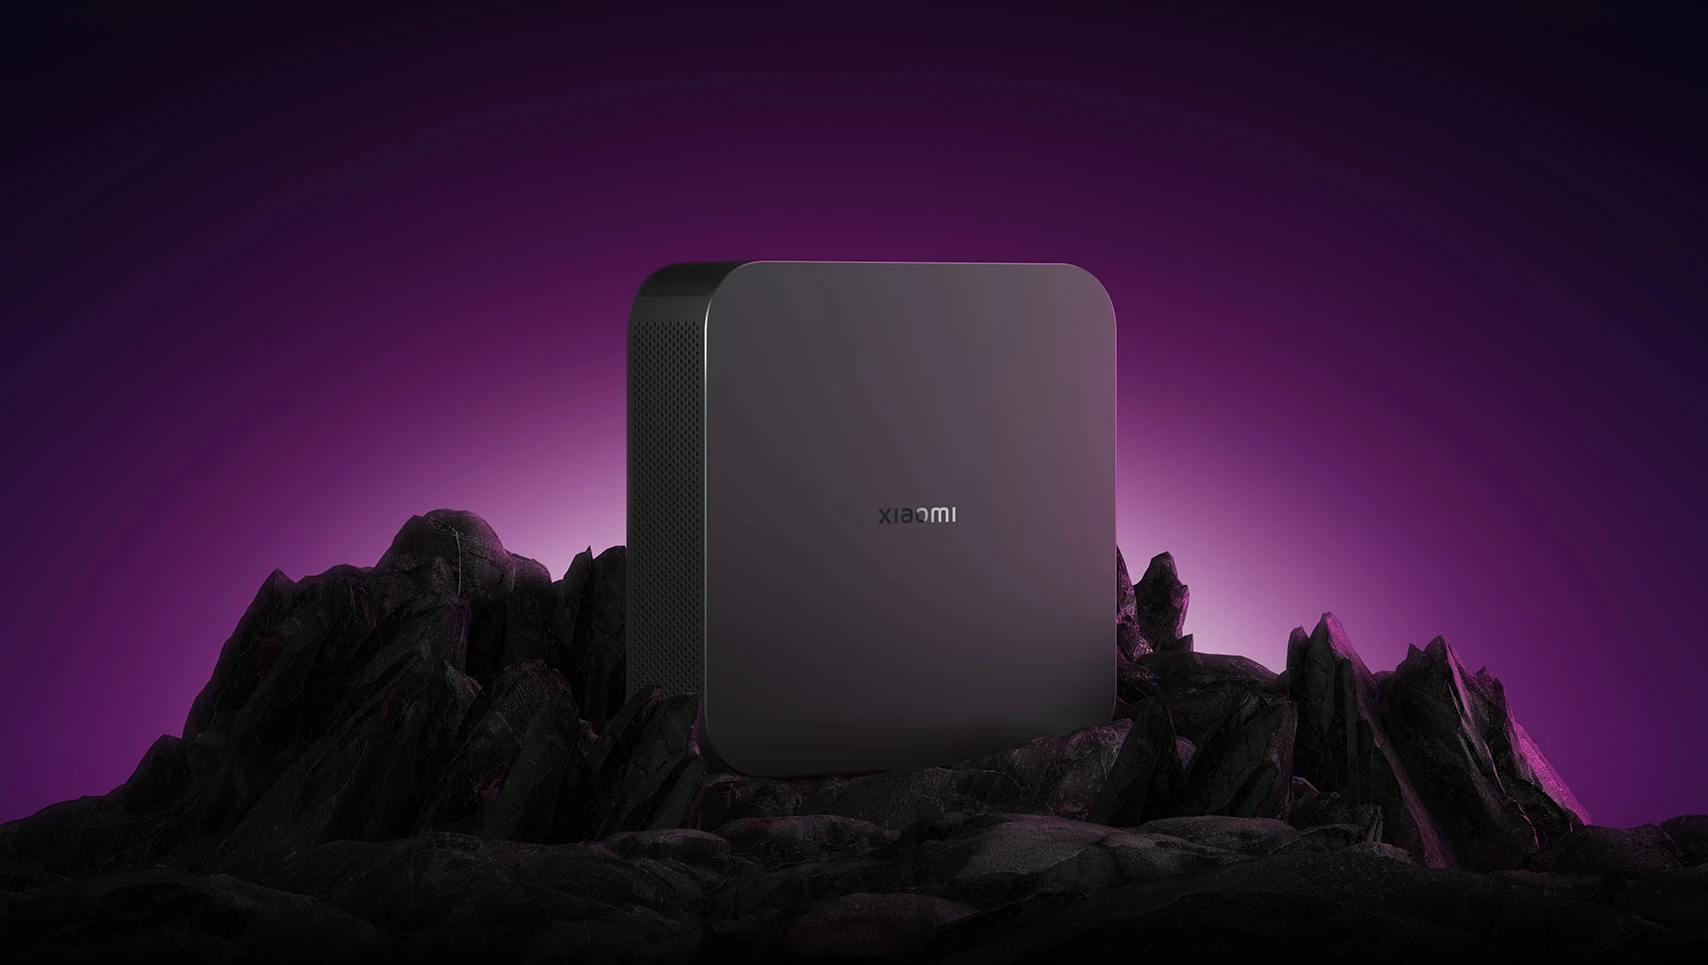 Xiaomi unveiled a competitor for the Mac mini for $400